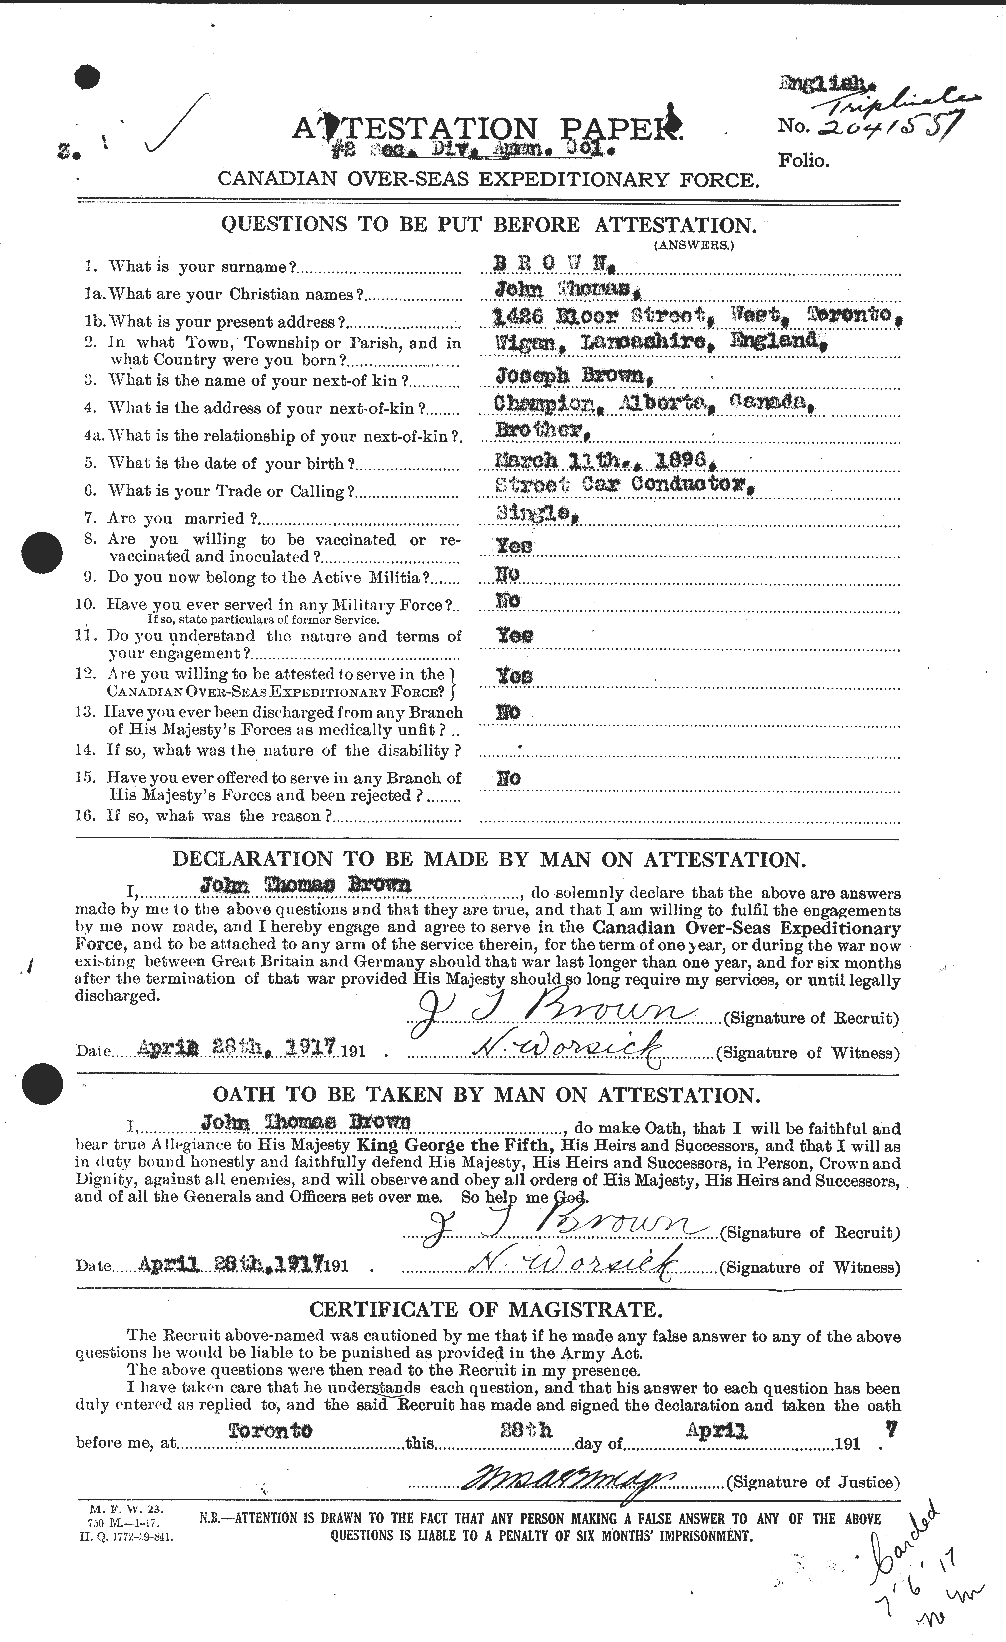 Personnel Records of the First World War - CEF 265889a